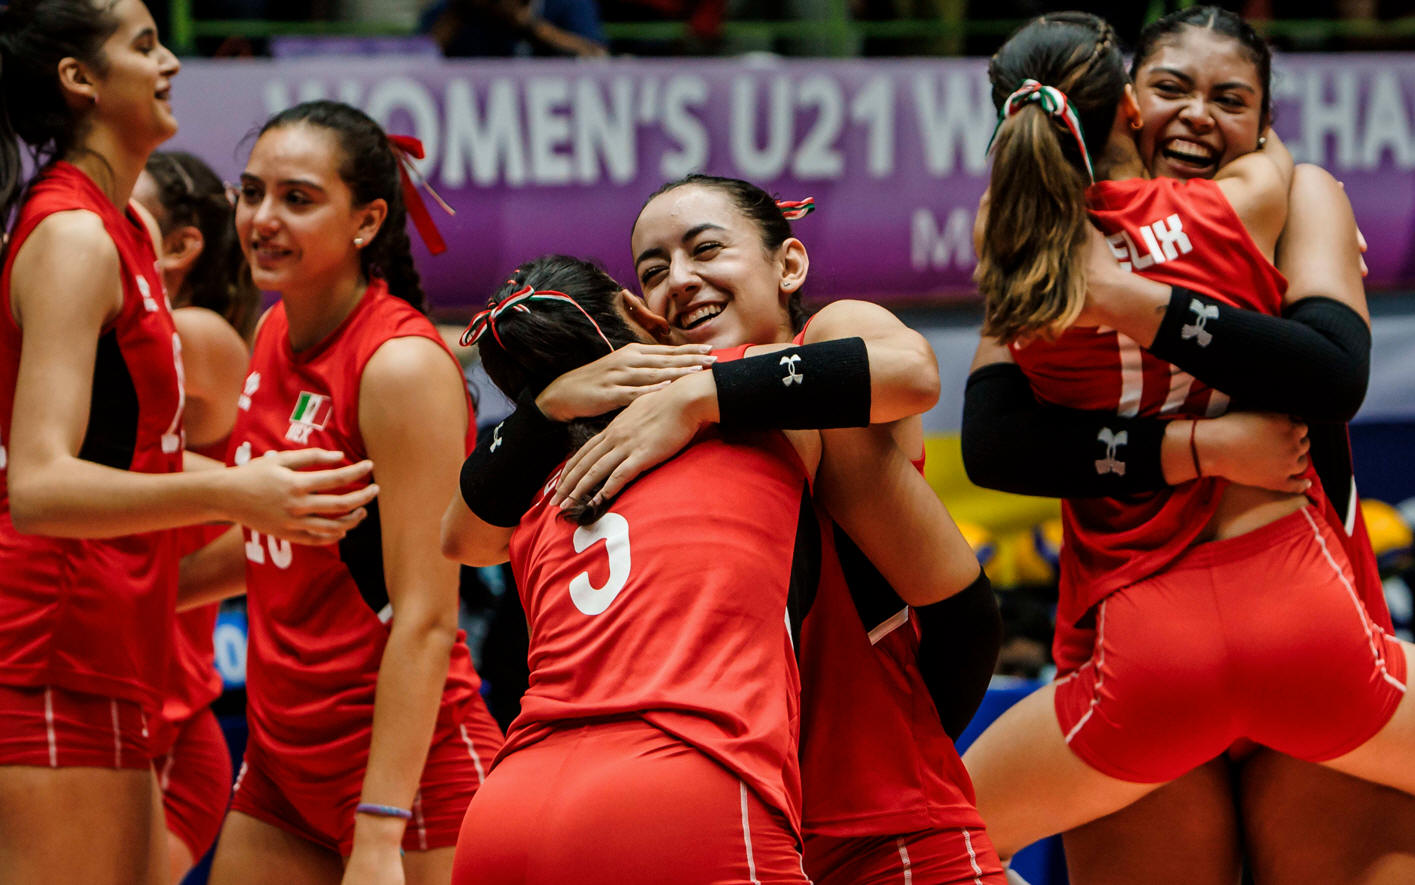 Mexico and USA claim spots in the second round of the Womens U21 World Championship